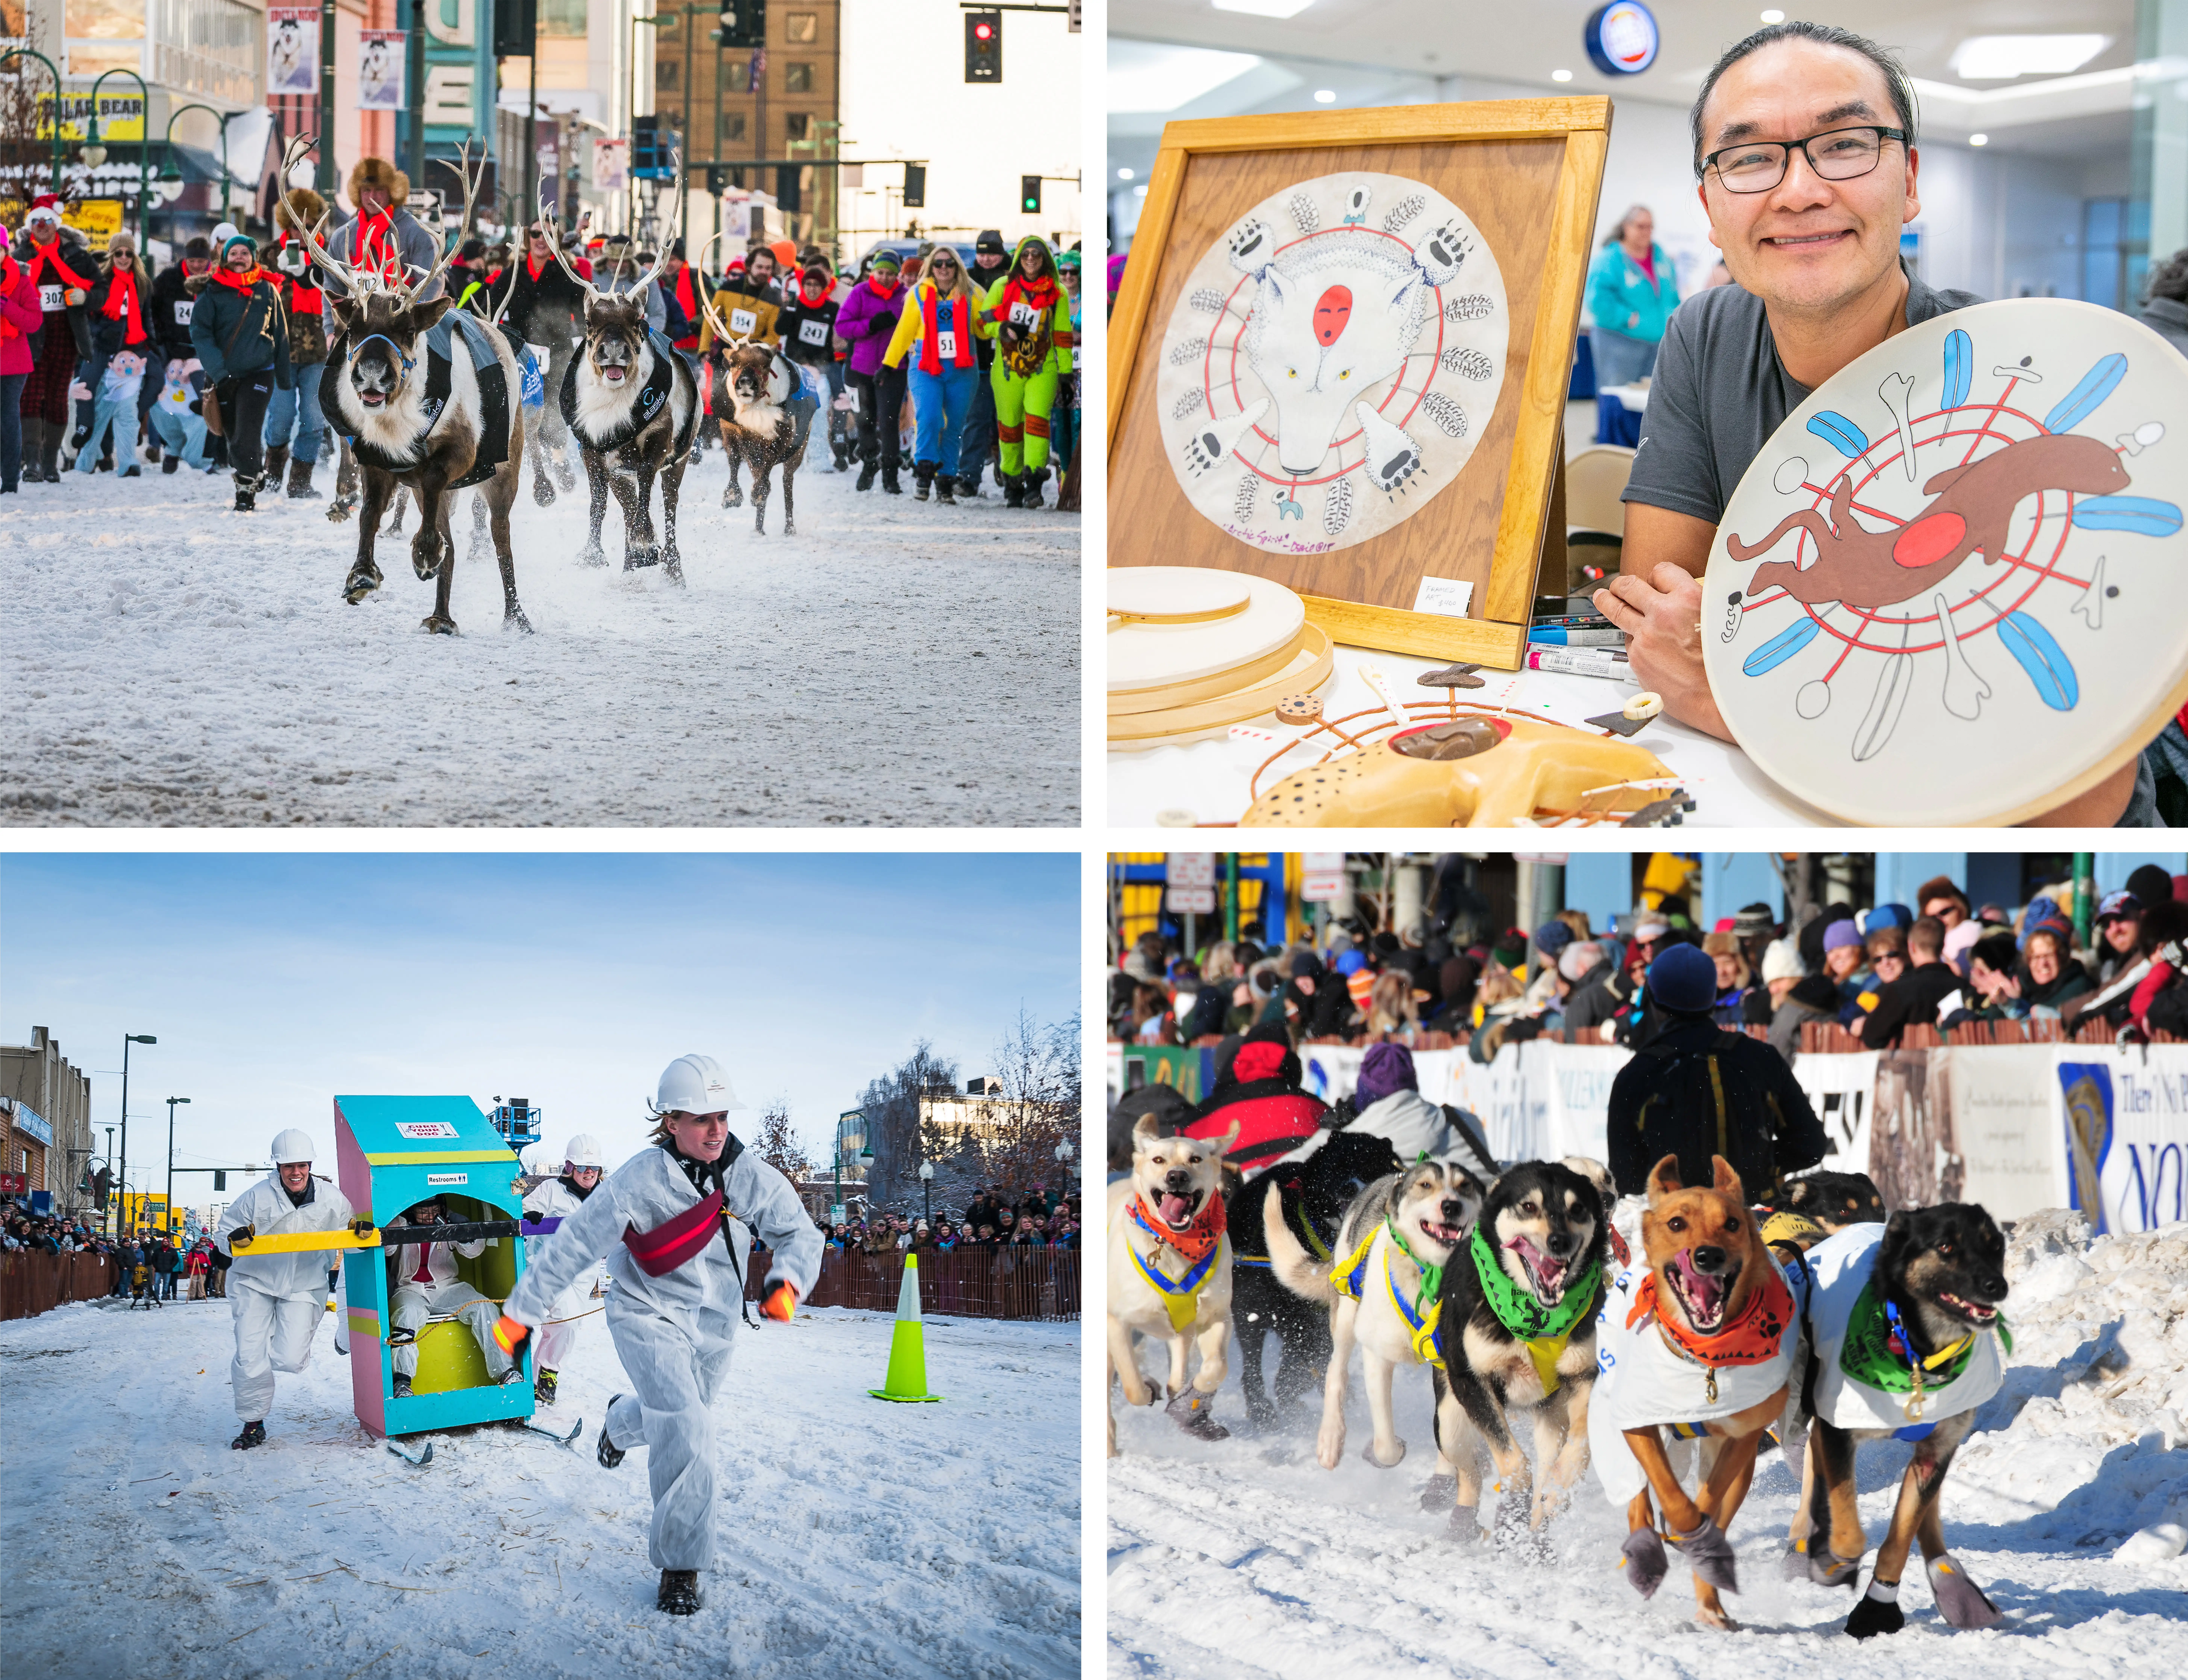 Running of the Reindeer (upper left); an artisan's booth at the Fur Rondy festival (upper right); The Outhouse Races at the Fur Rondy Festival (bottom left); and the Iditarod Sled Dog Race (bottom right)